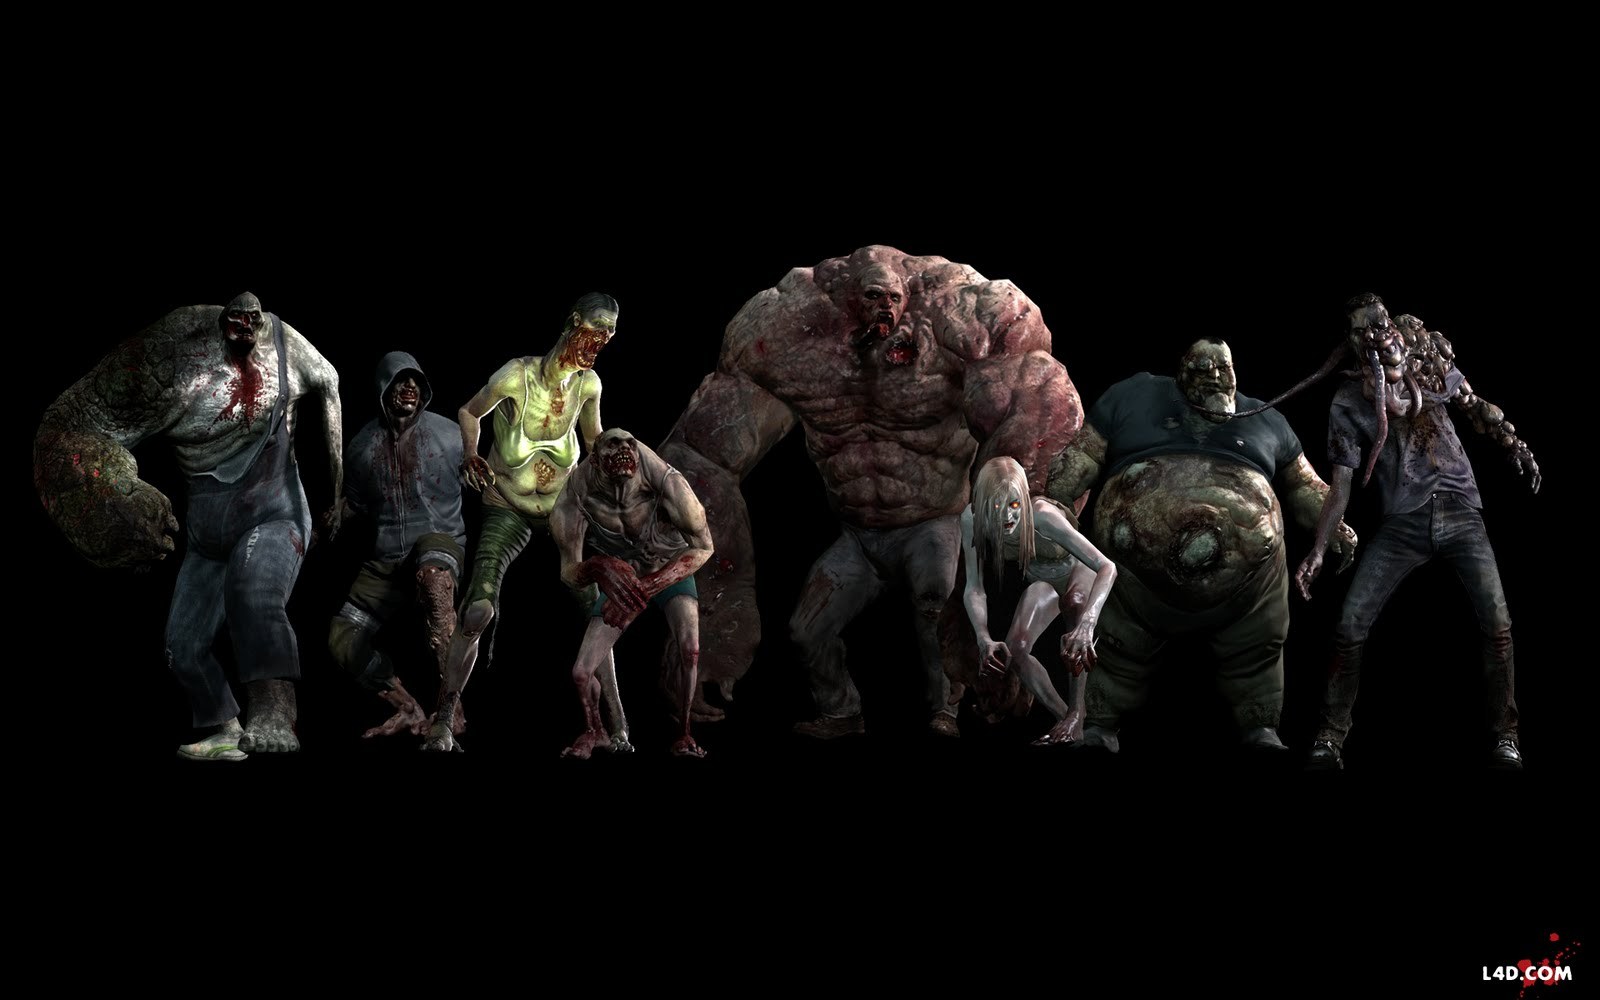 favorite Special Infected?